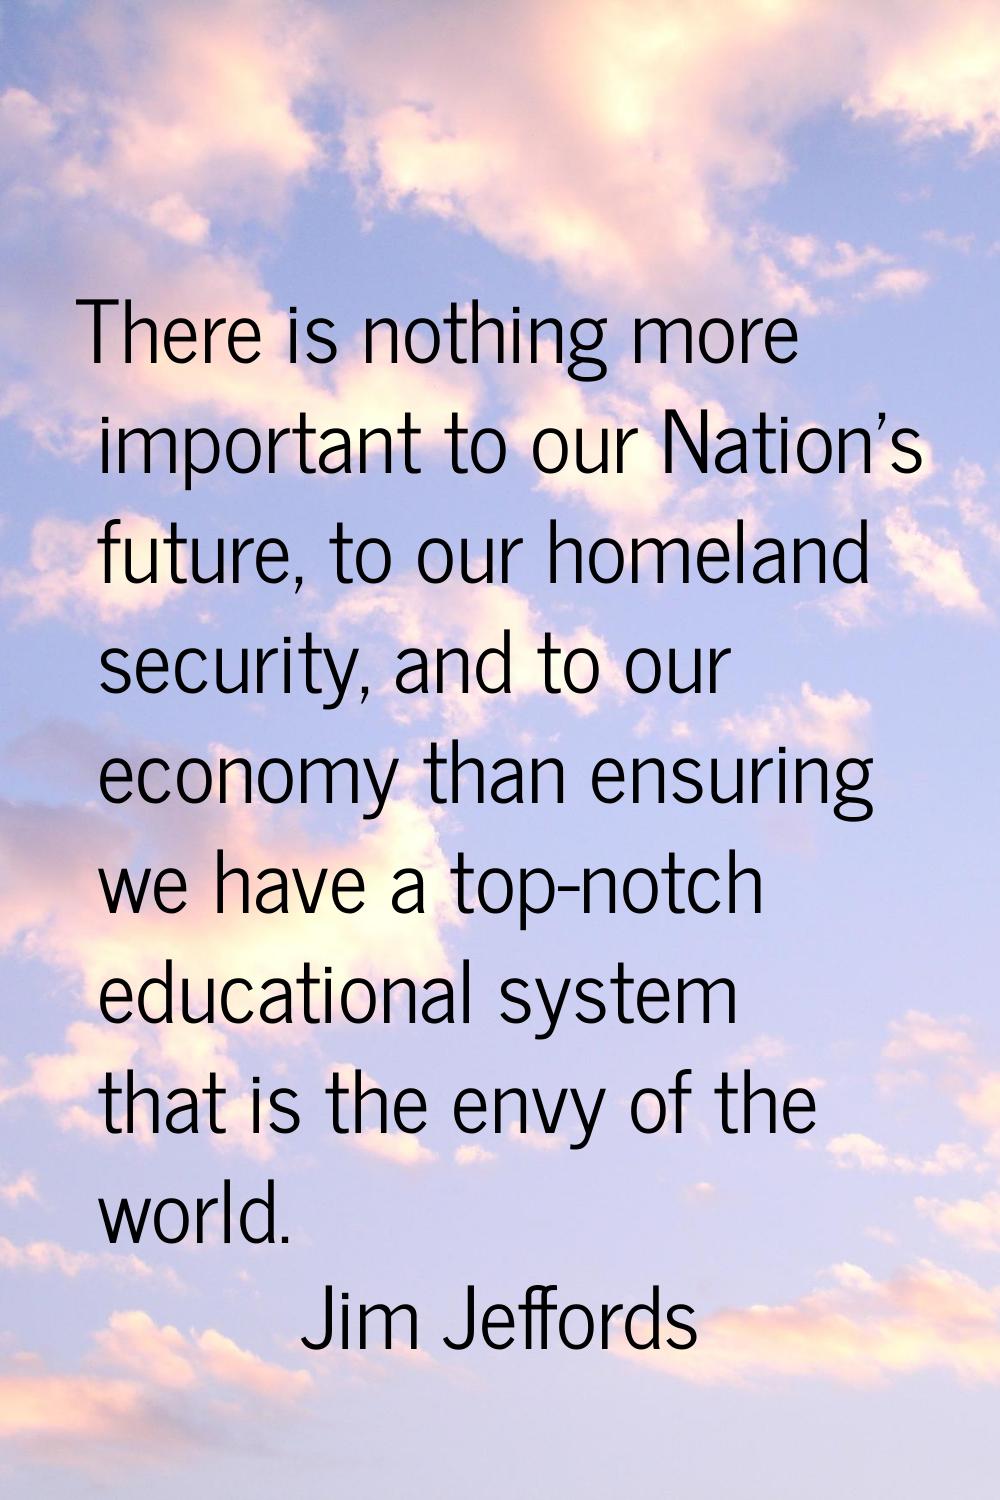 There is nothing more important to our Nation's future, to our homeland security, and to our econom